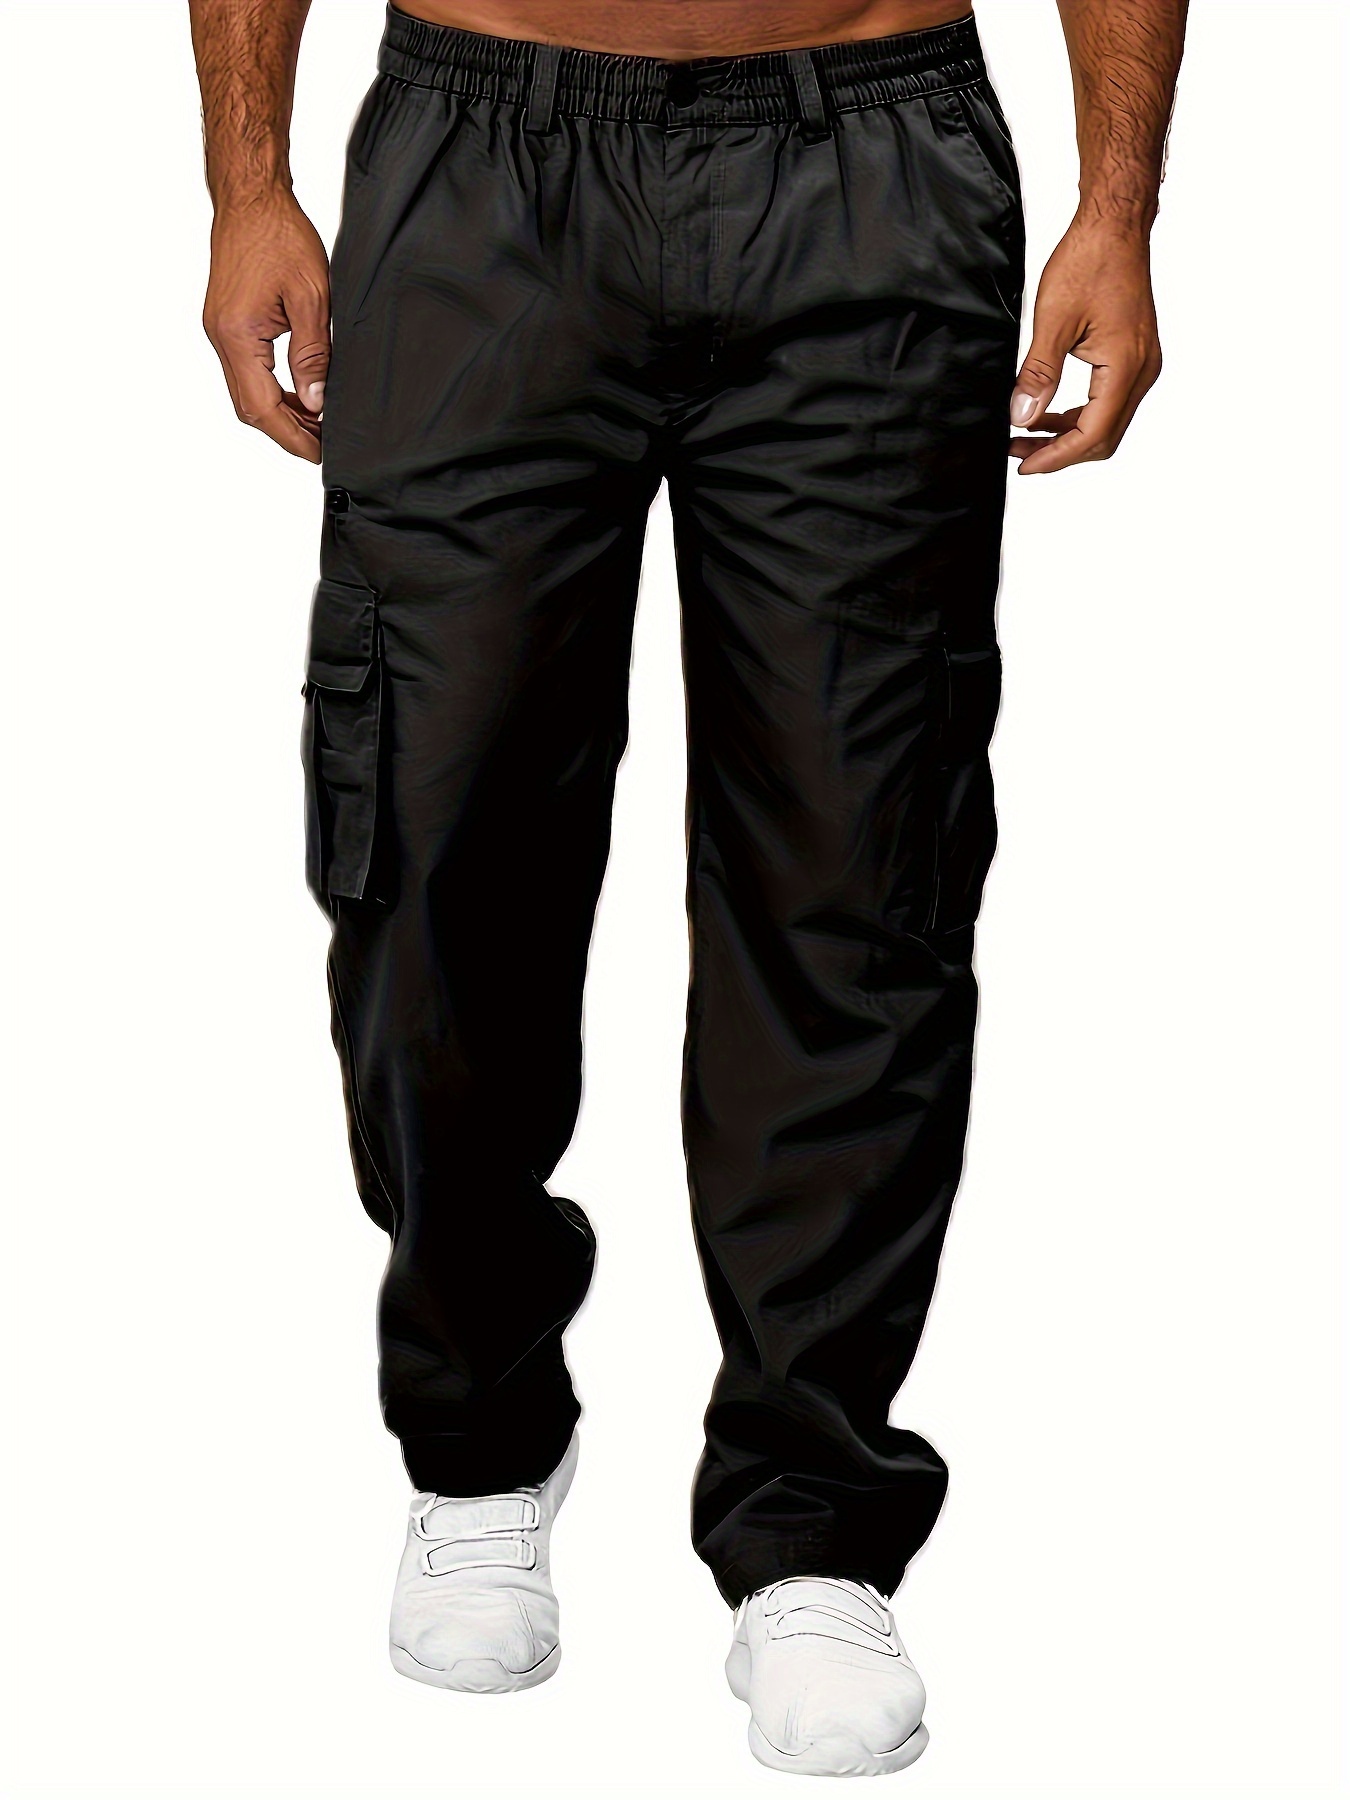 Relaxed Fit Work Pants - Black - Men